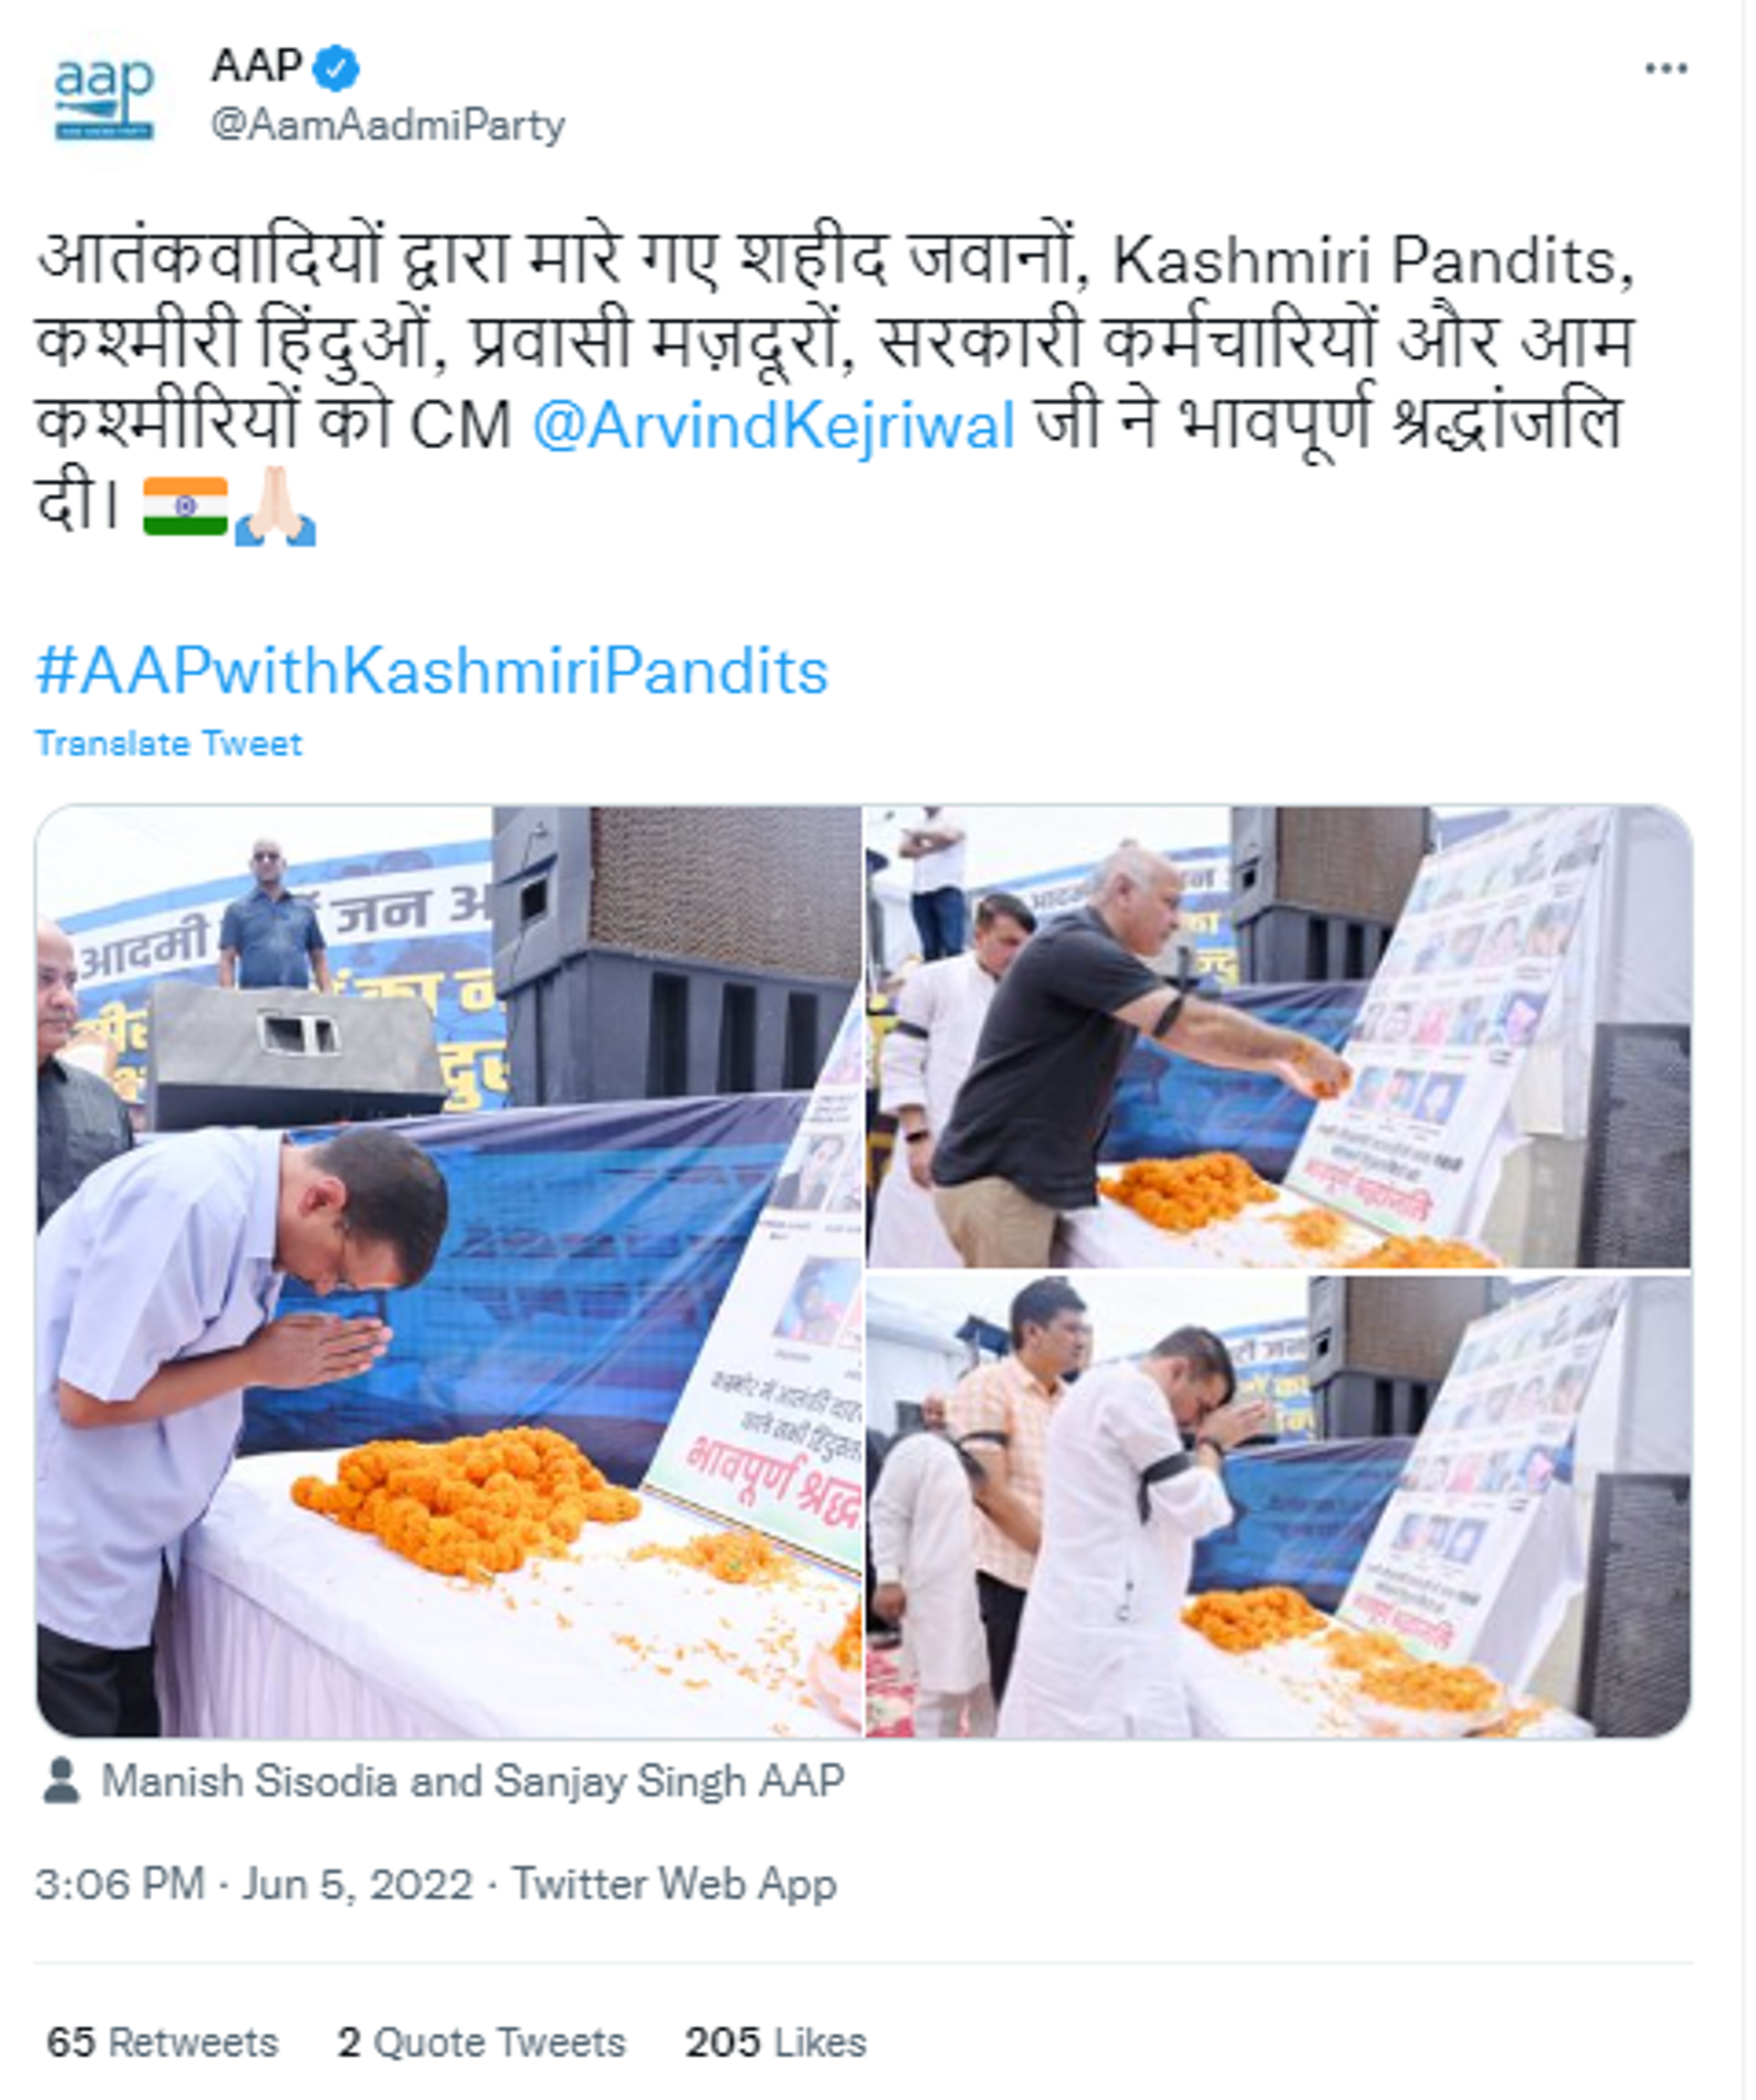 Aam Aadmi Party Politicians Pay Tributes to Those Killed by Terrorists in Kashmir - Sputnik International, 1920, 05.06.2022